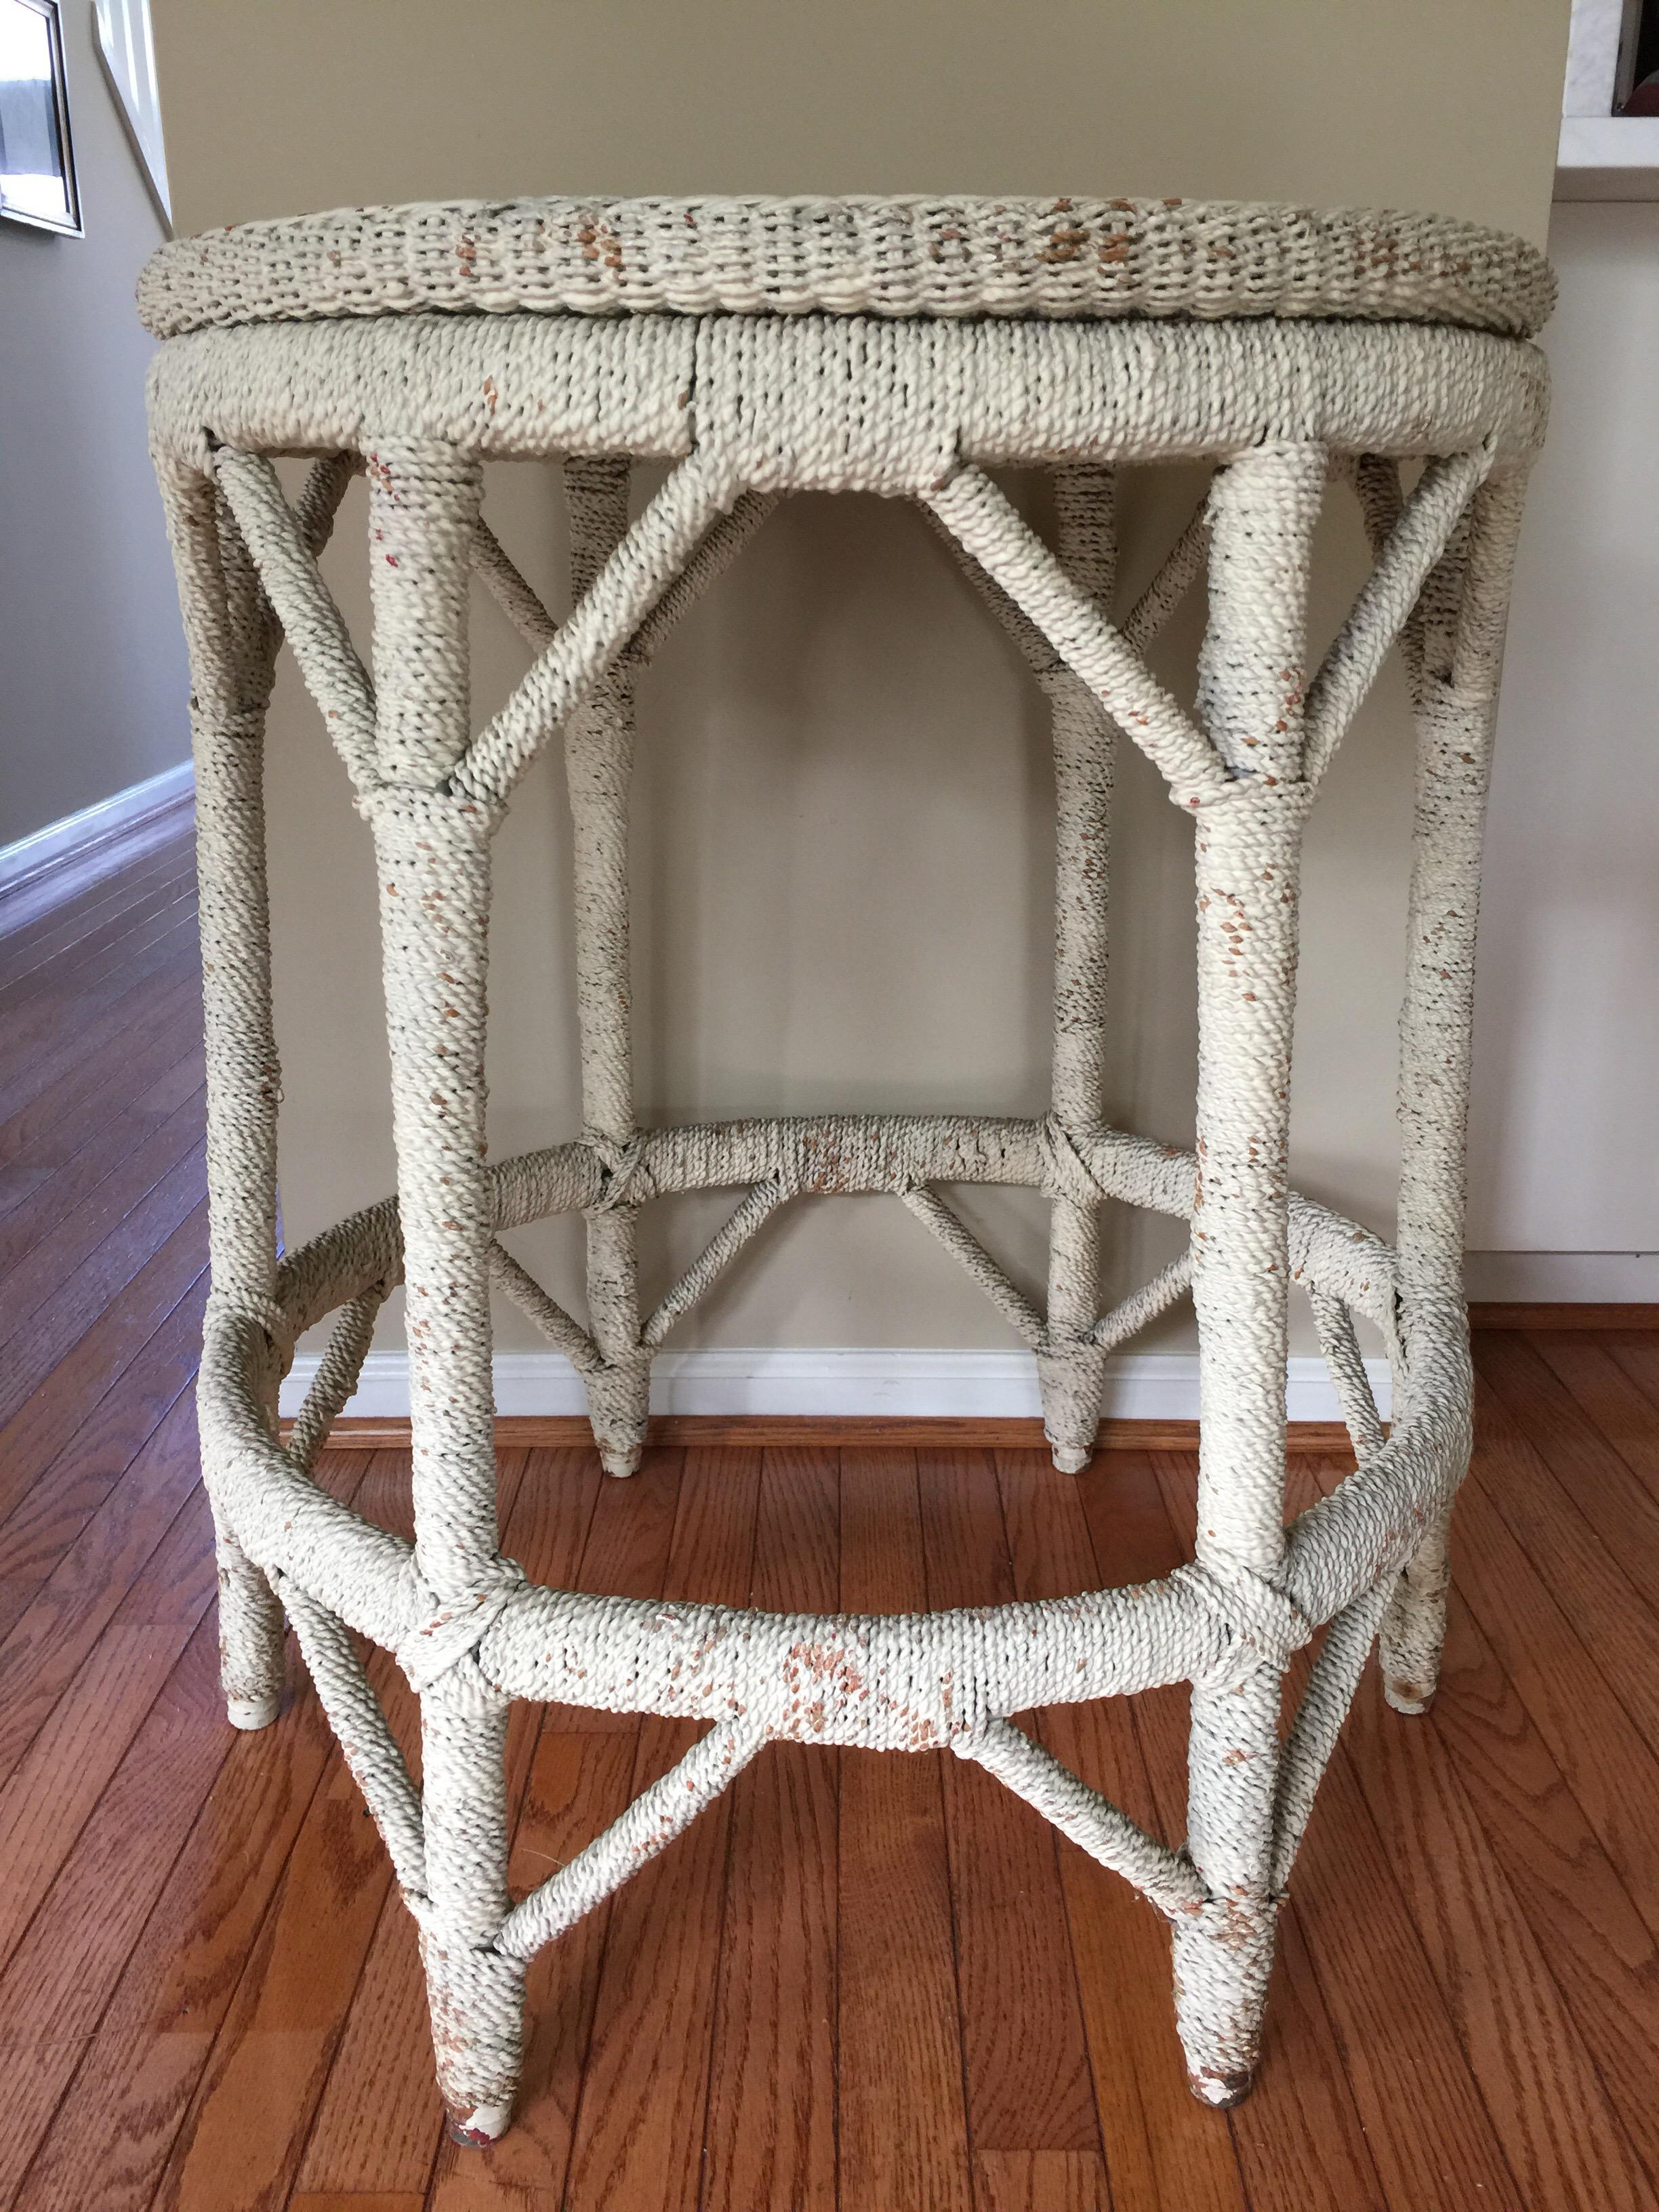 Tall round whitewashed wicker/rattan-like rope wrapped center hall entry table. This sturdy sculptural table can be used as a side, end accent table or bedside table. A transitional table that can be used in nautical or shabby chic beachy interiors.